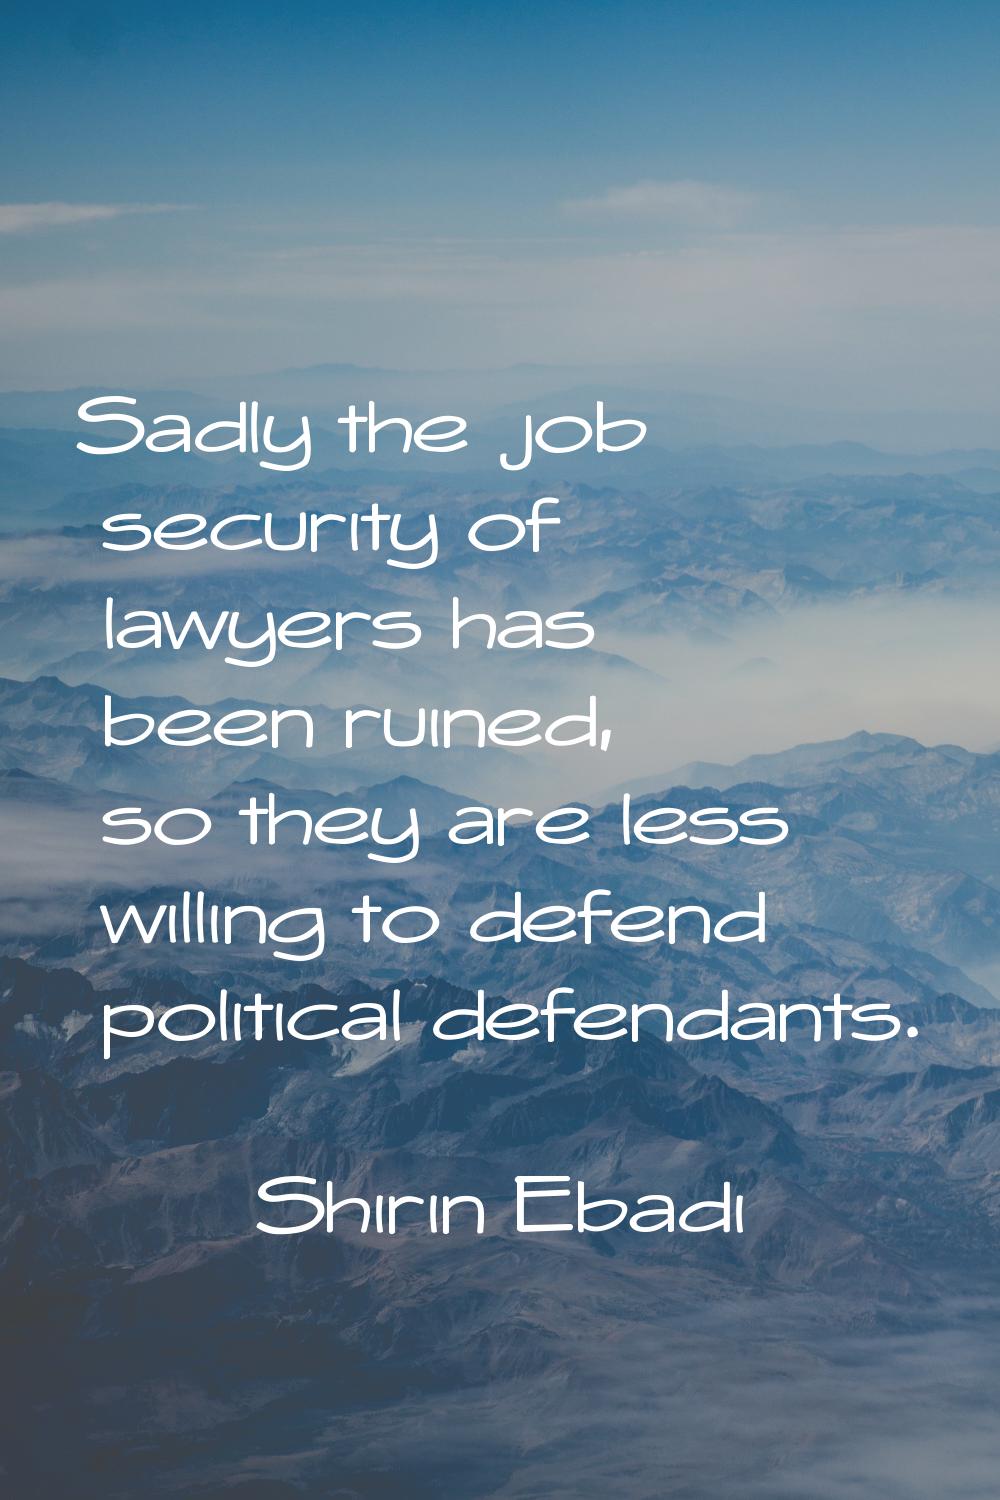 Sadly the job security of lawyers has been ruined, so they are less willing to defend political def